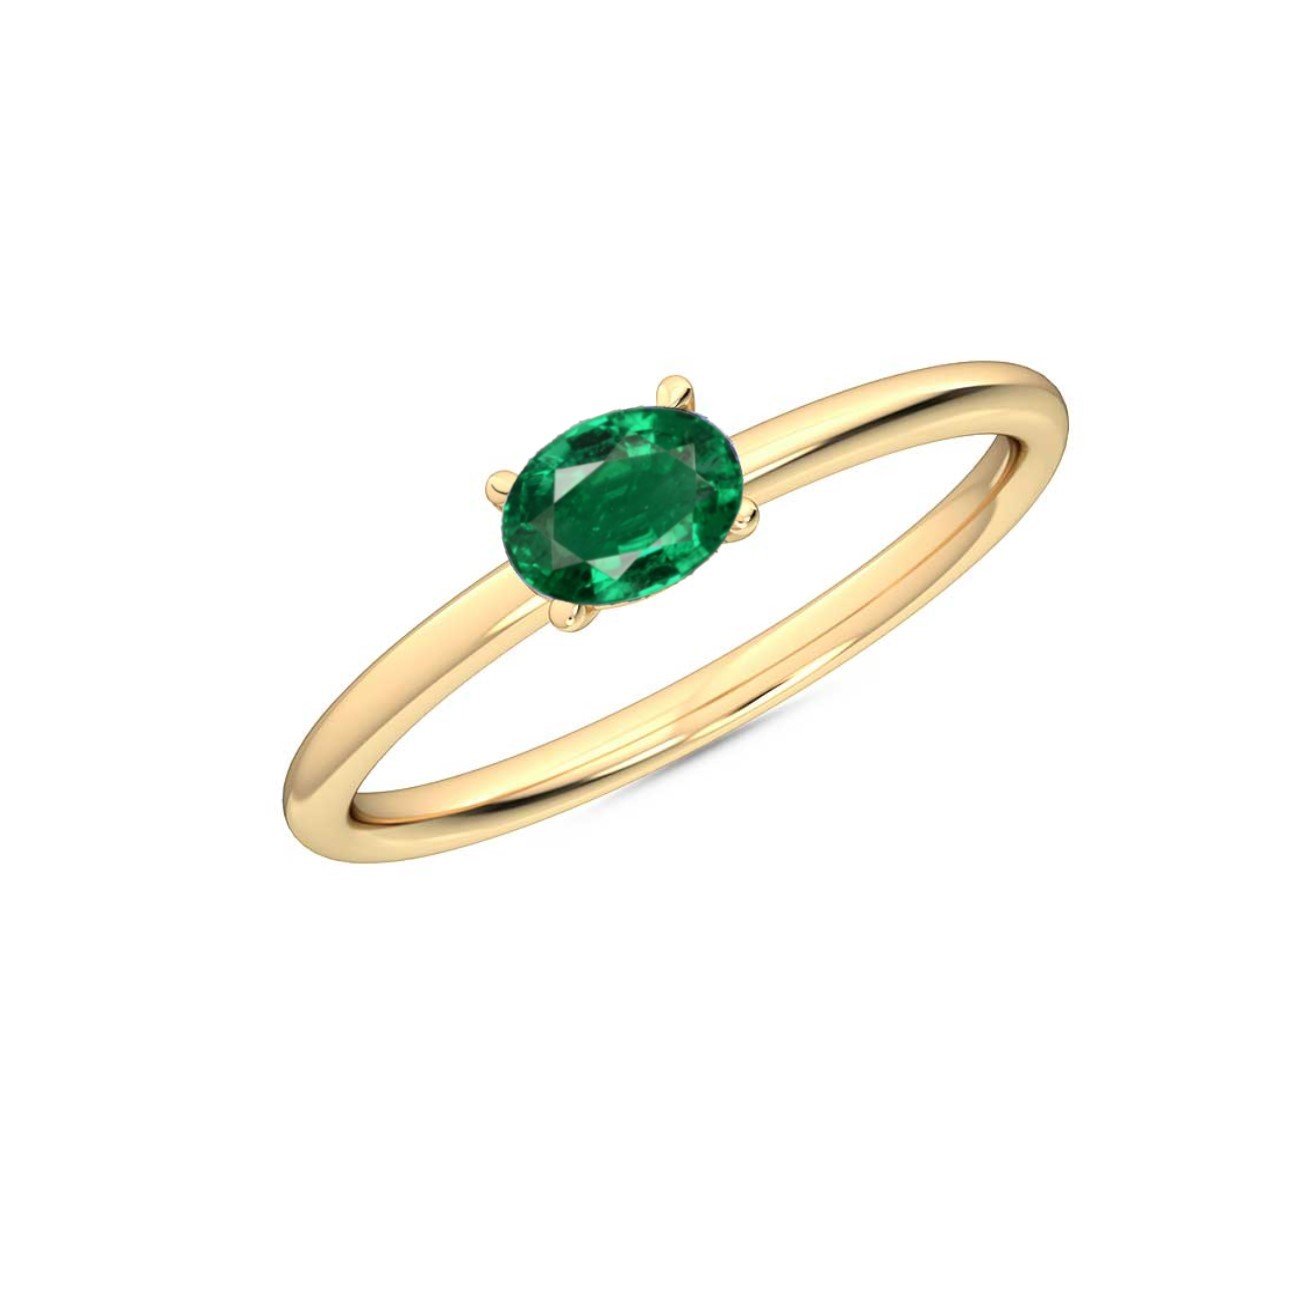 Oval Cut Petite Ruby Emerald Sapphire Ring in 14K White Rose or Yellow Gold, Precious Gemstone Ring for Women, Fine Jewelry